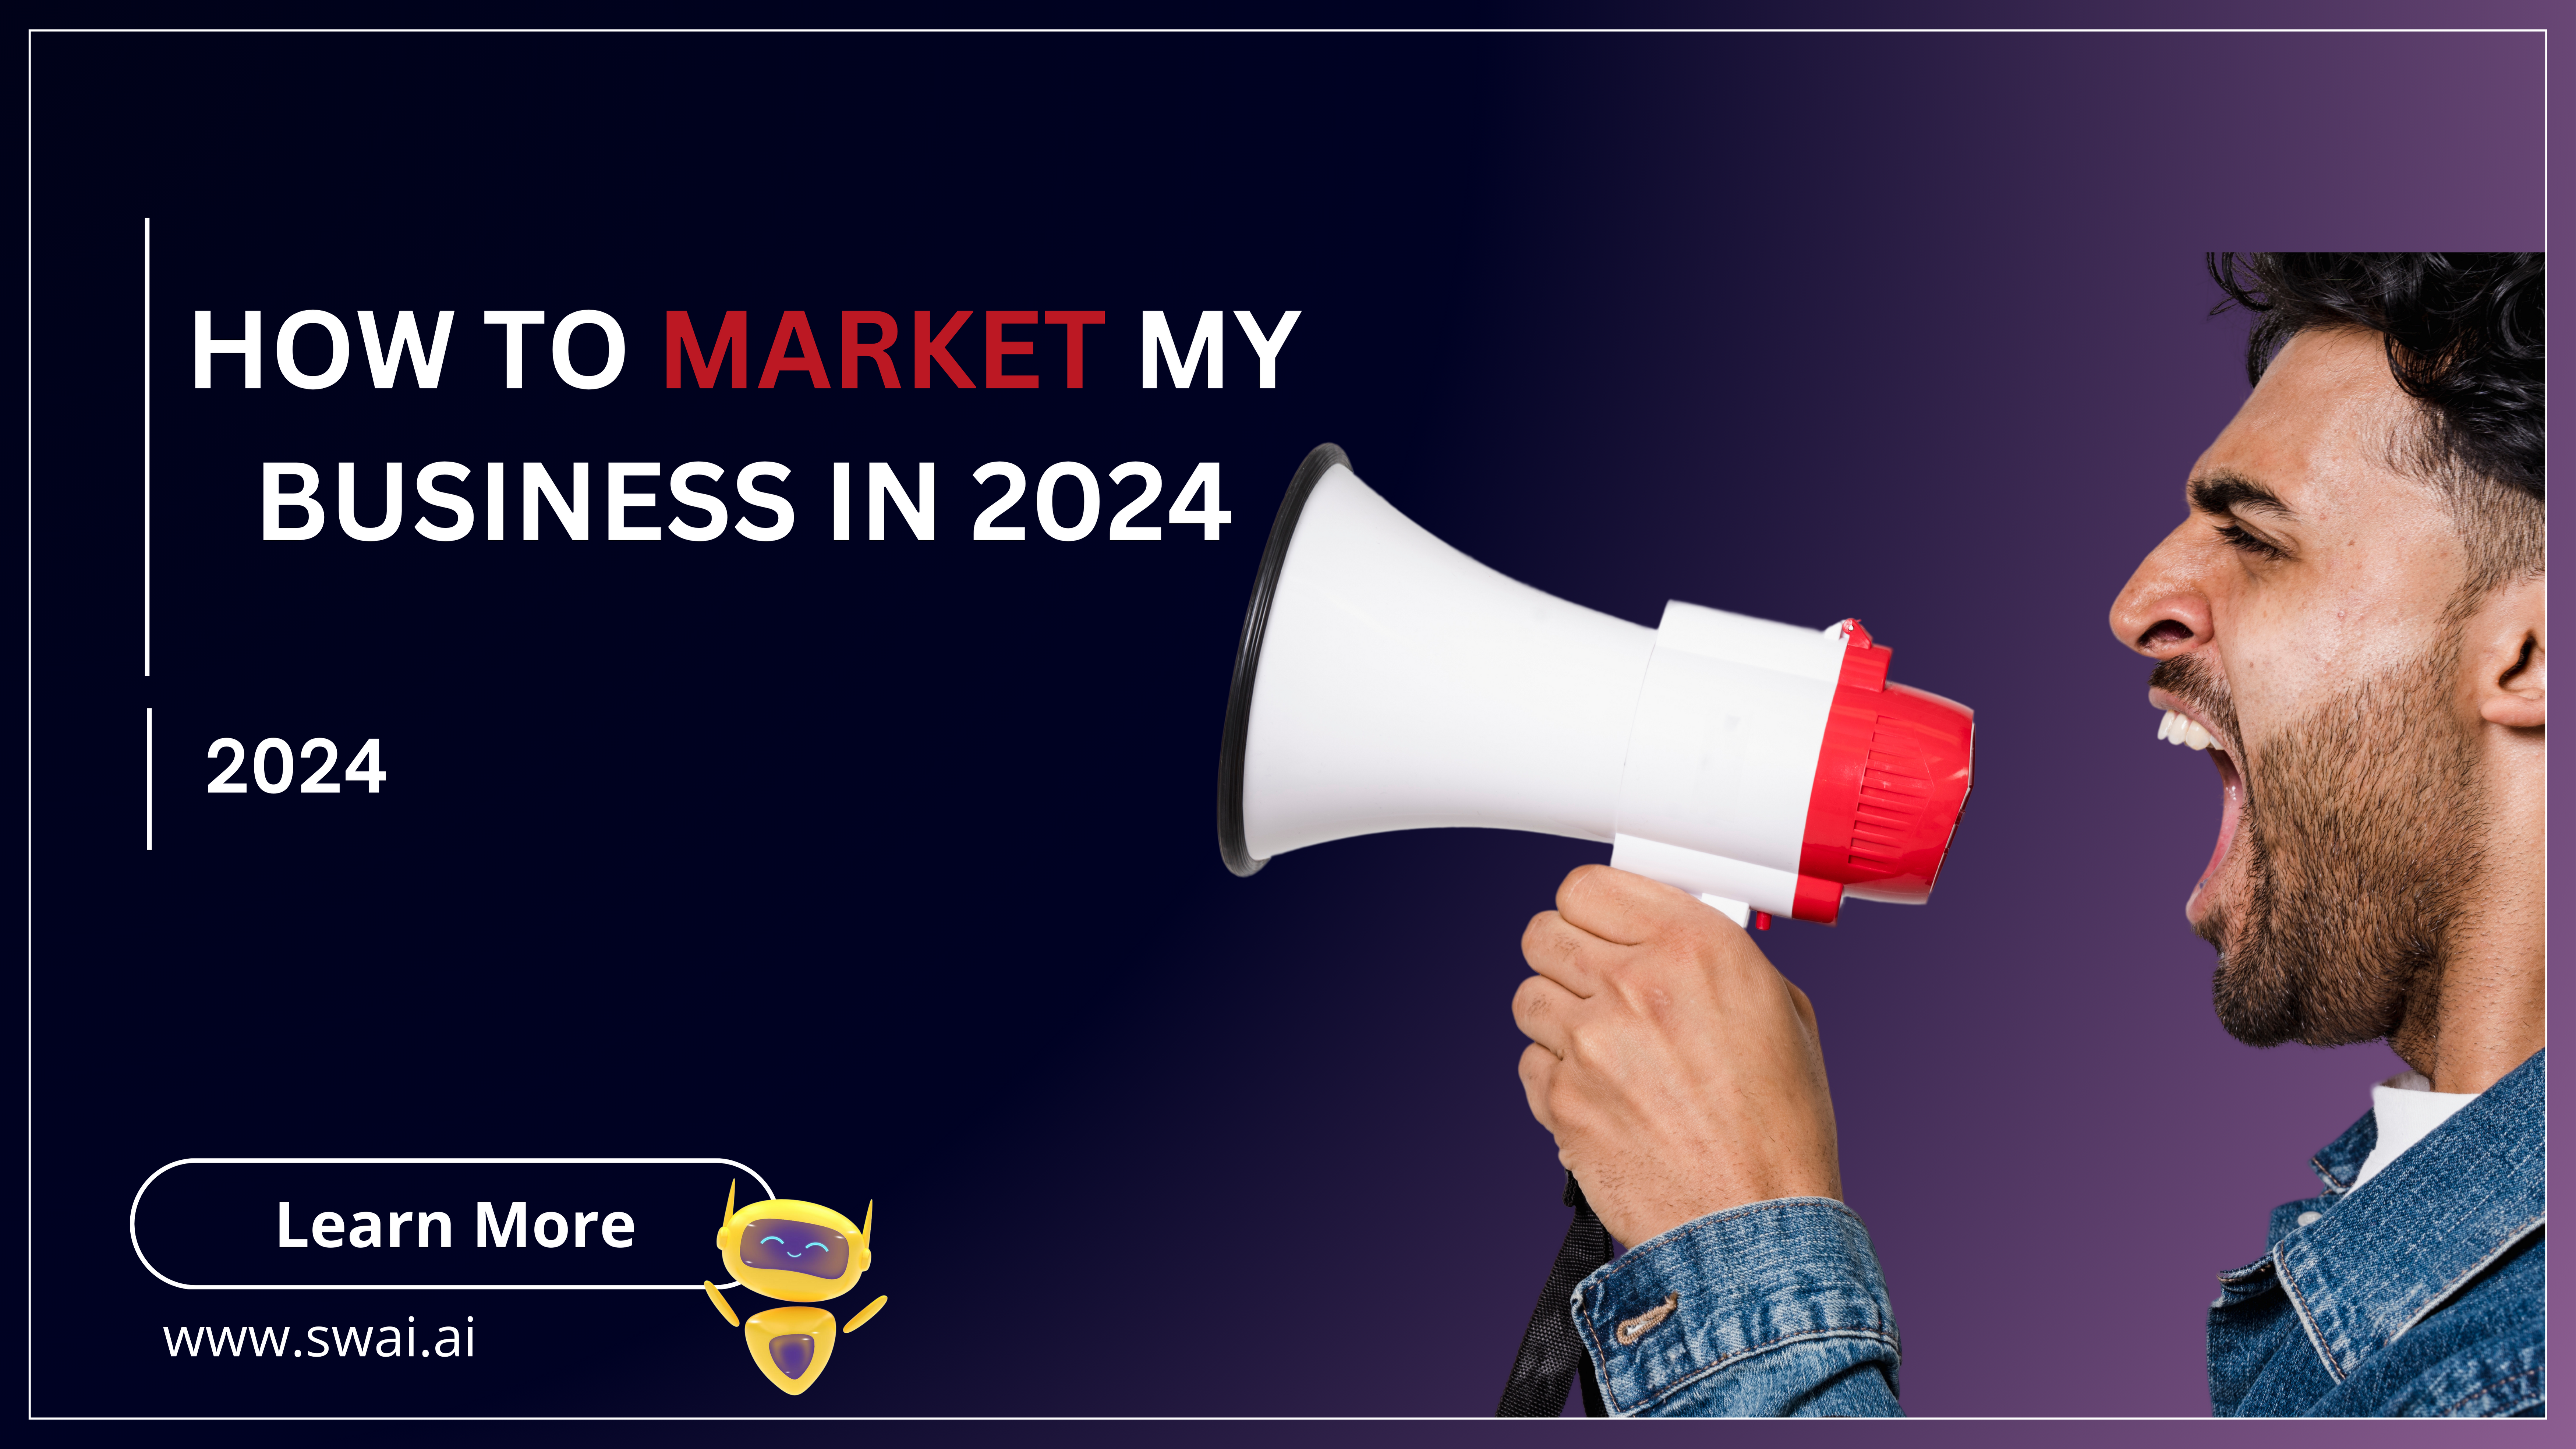 How to market my business in 2024